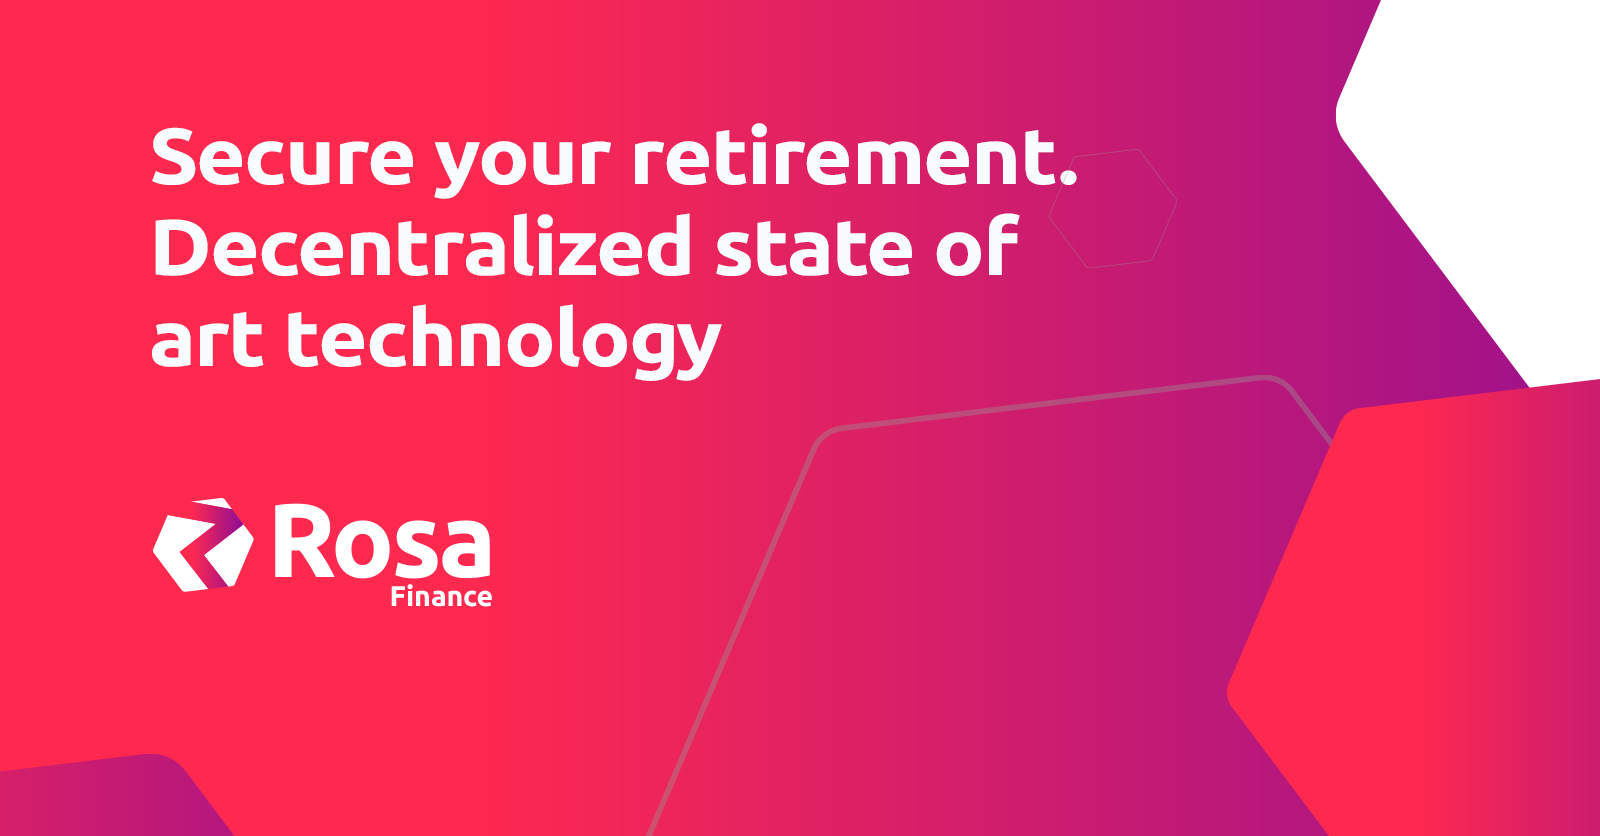 Plan your retirement with ROSA, the hottest DeFi app for Crypto Pension Funds